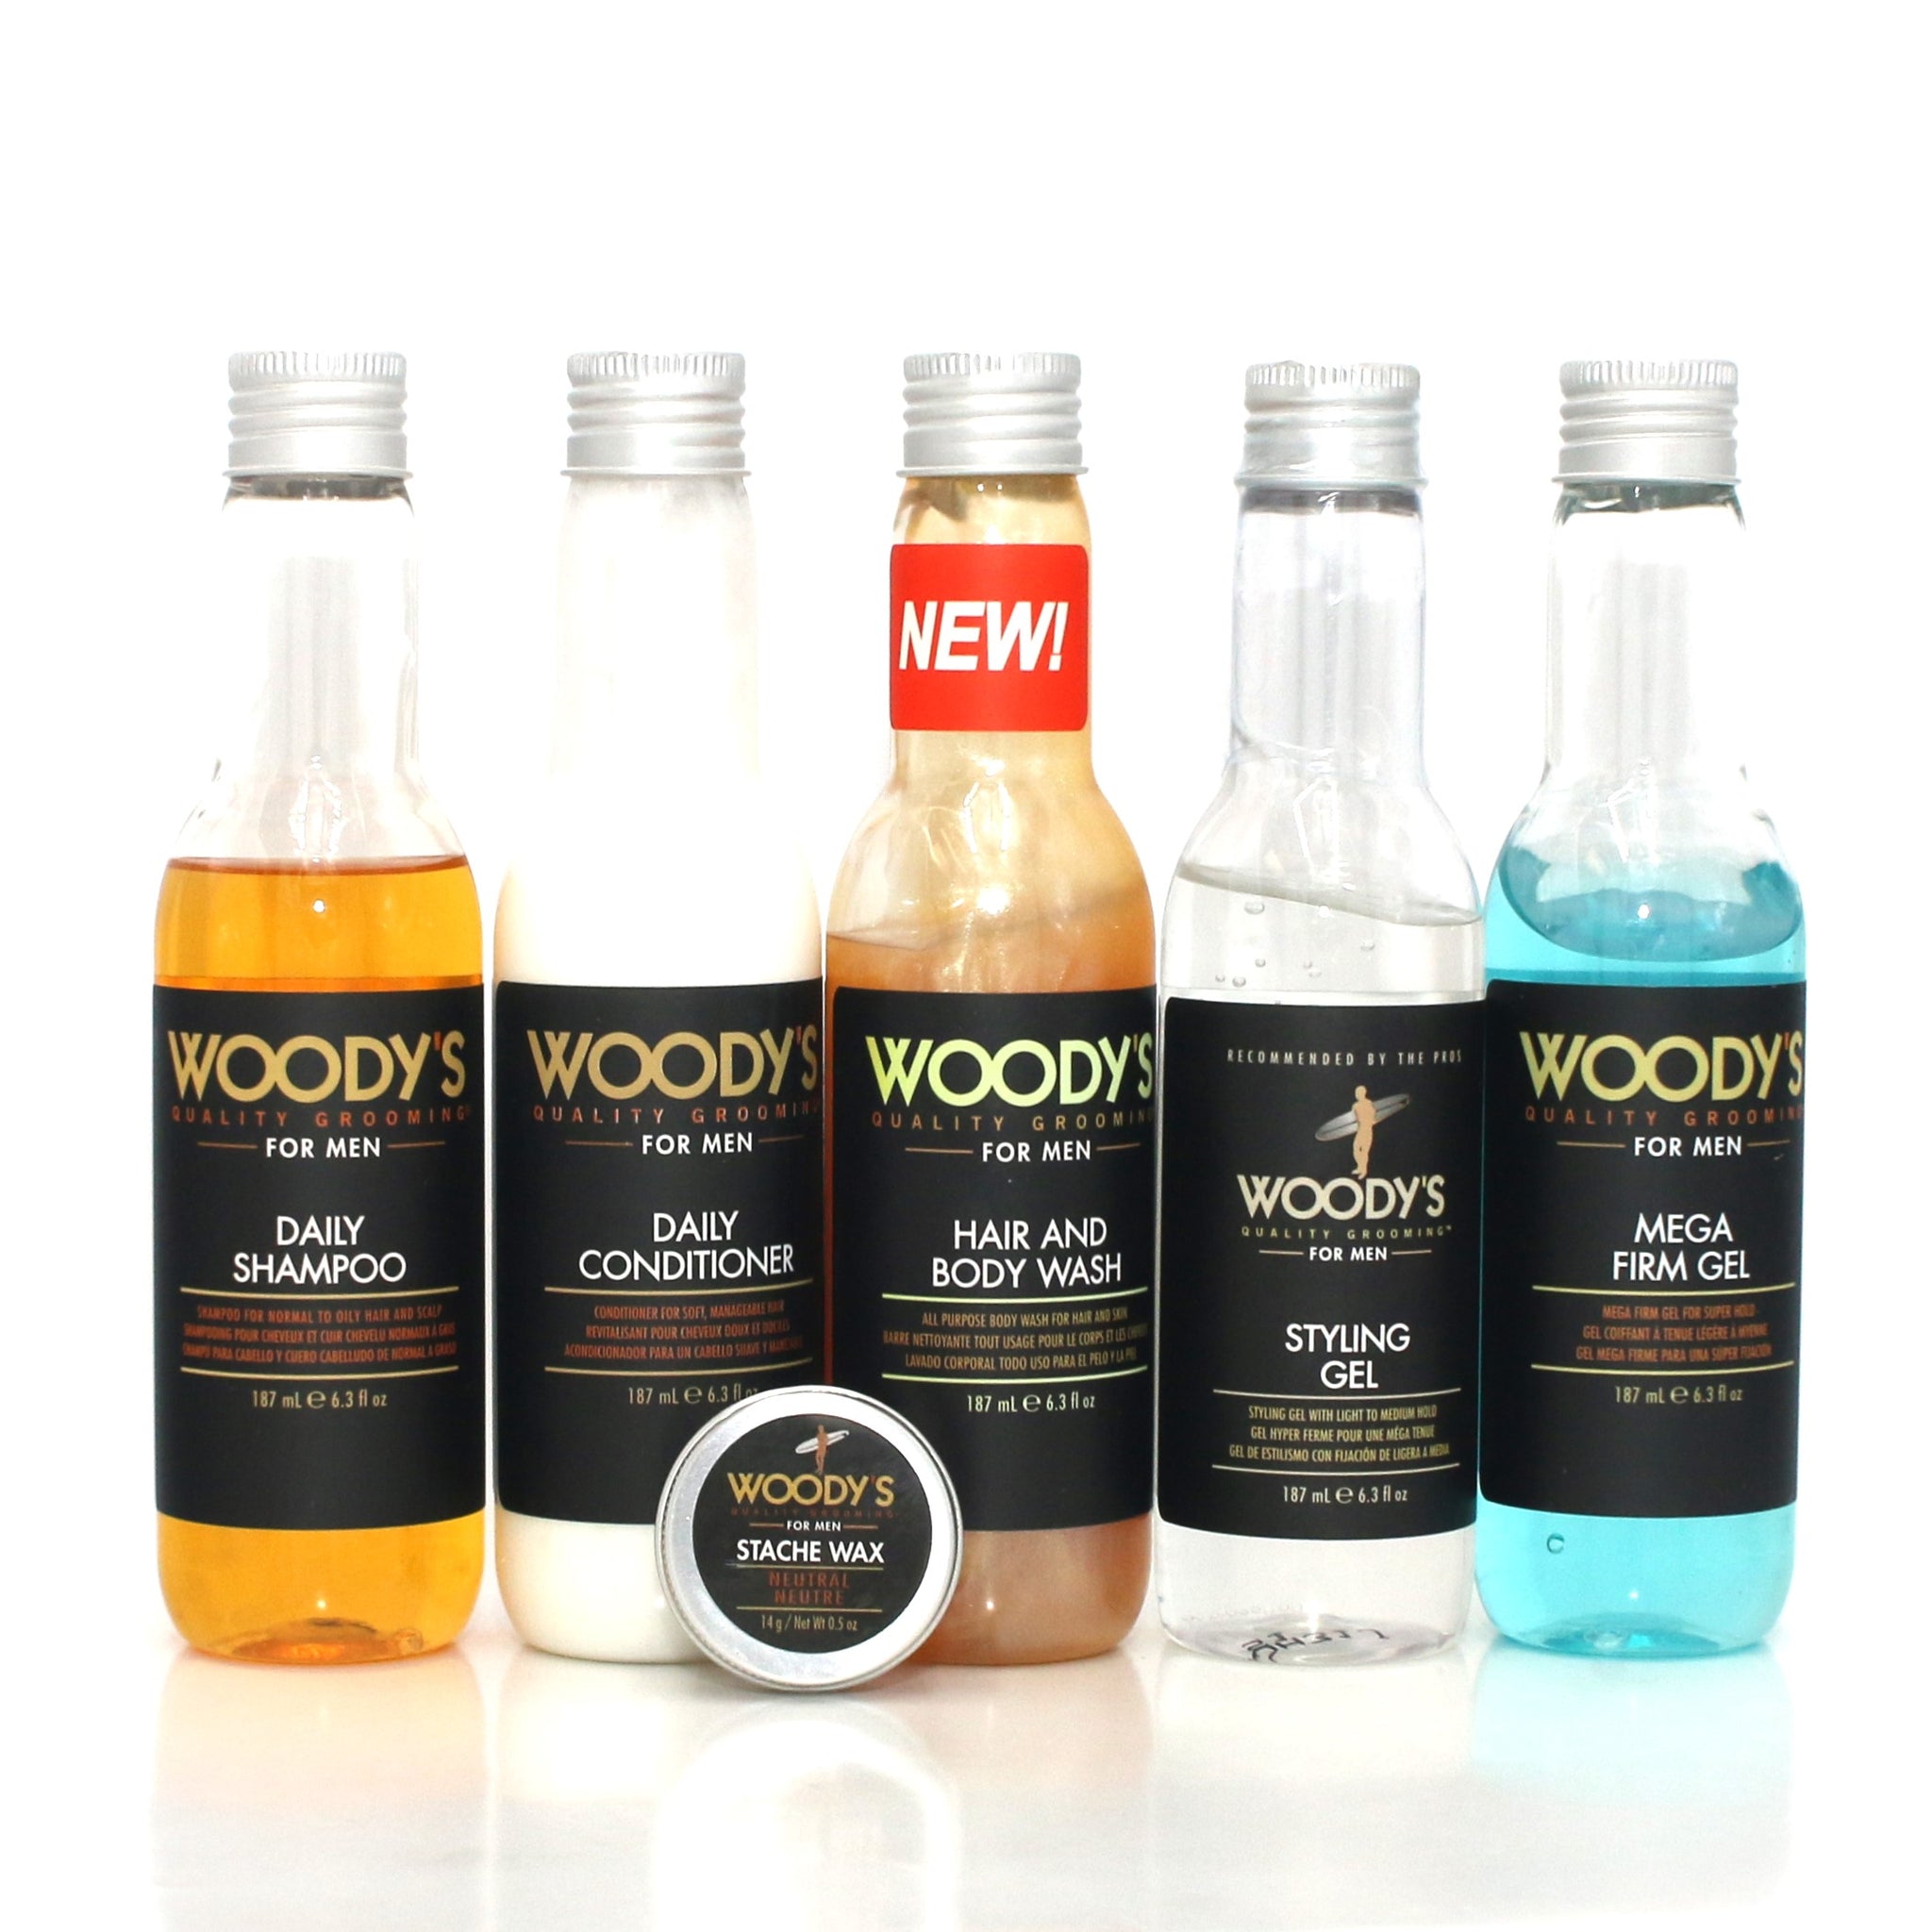 WODDYS for Men Daily Shampoo and Conditioner Body Wash, Styling & Mega Firm Gel